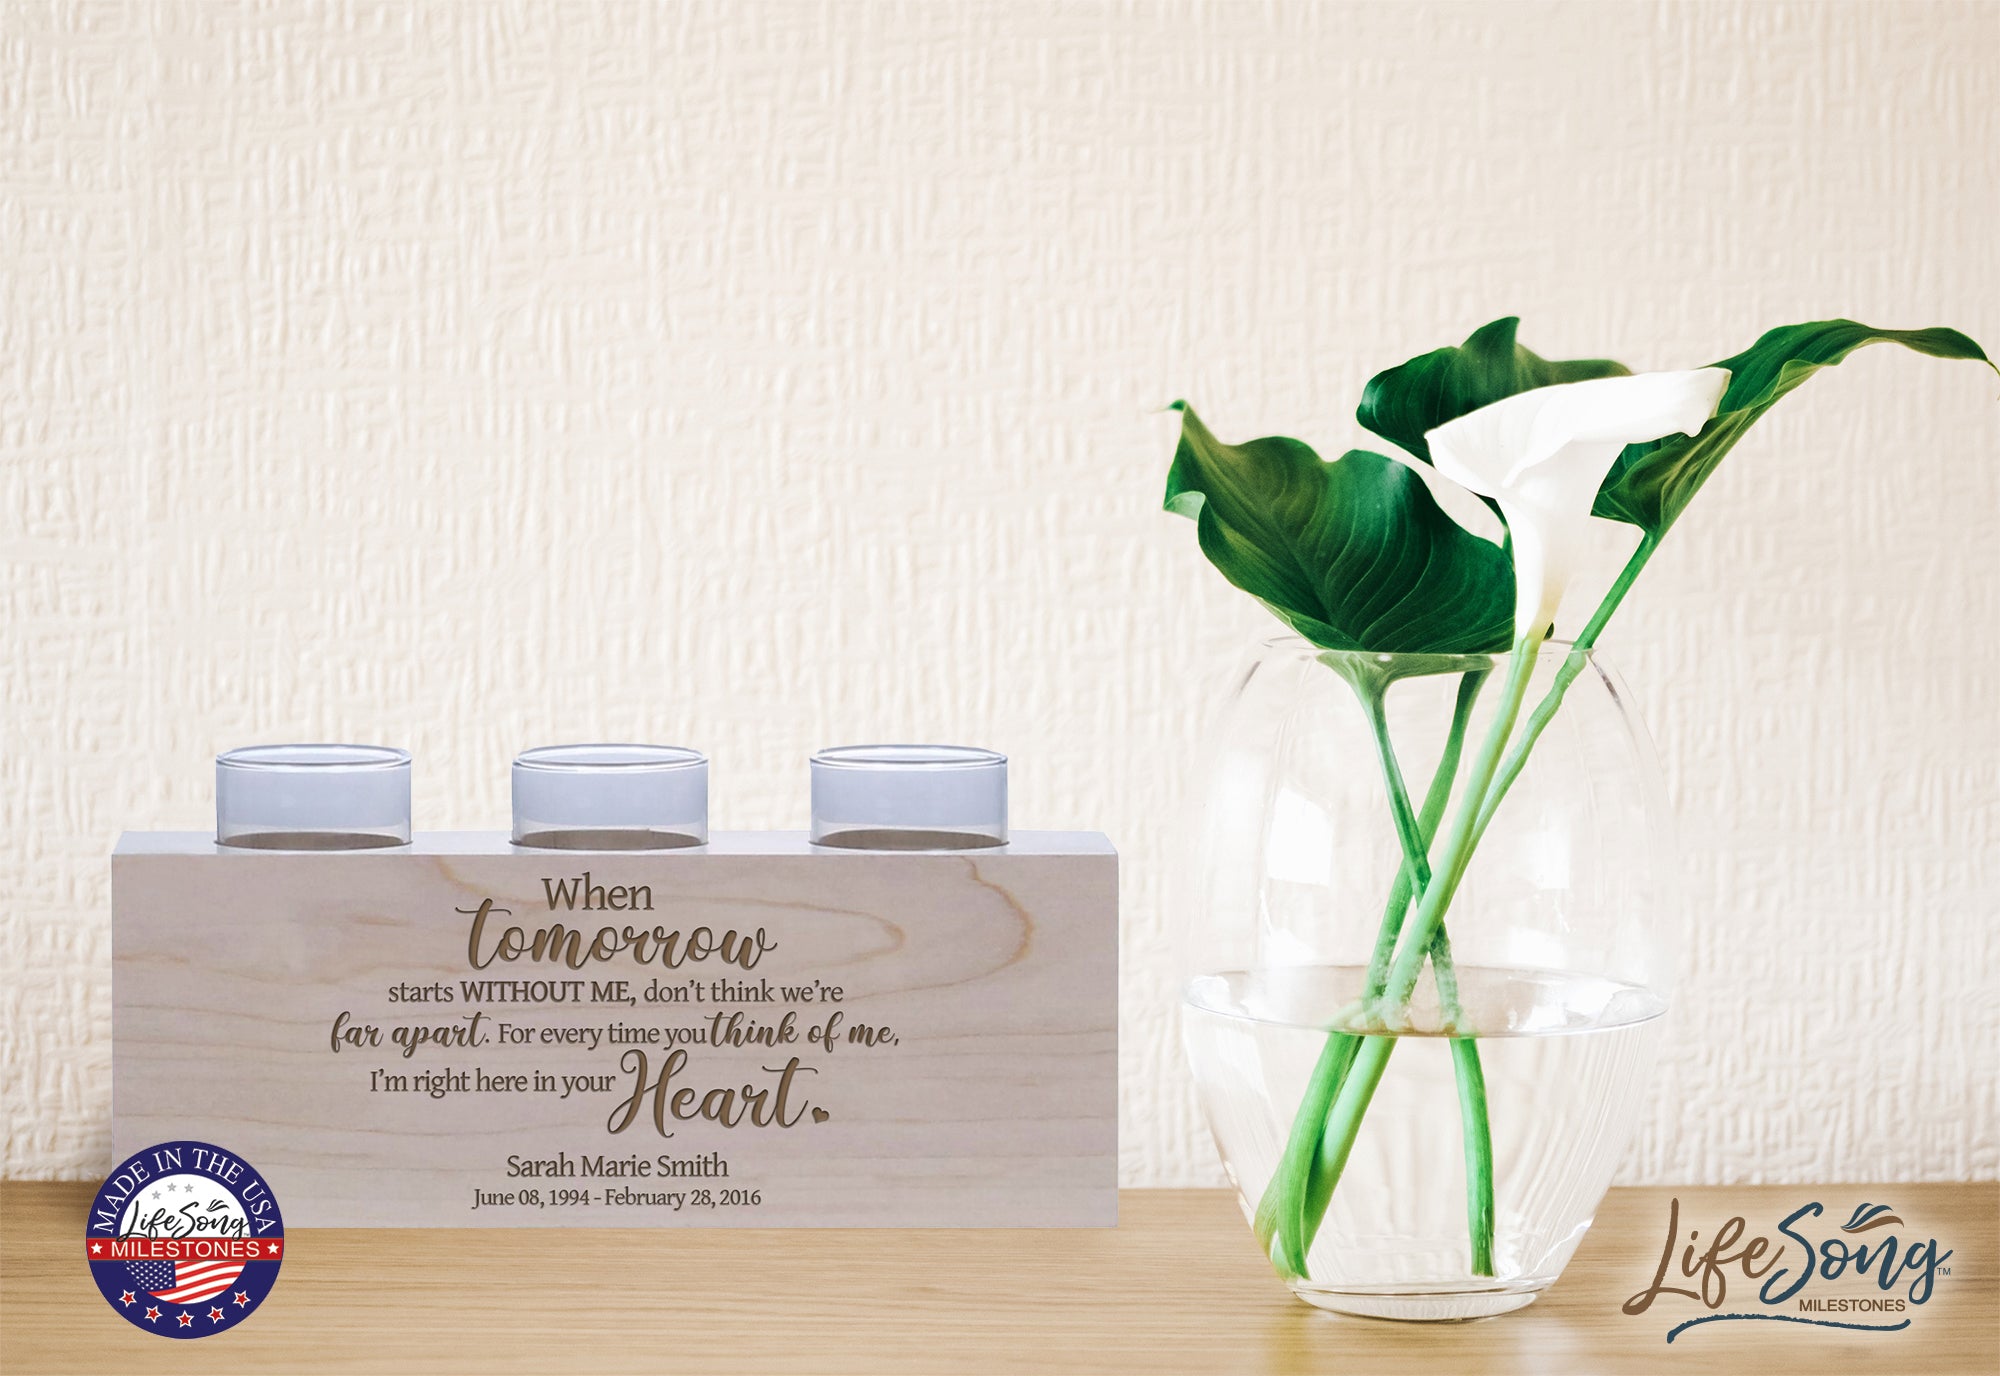 LifeSong Milestones Personalized Memorial Sympathy 3 Votive Candle Holder - When Tomorrow Starts Engraved Tea Light Candle Loss of Loved One Gift - 10” x 4” x 4”.